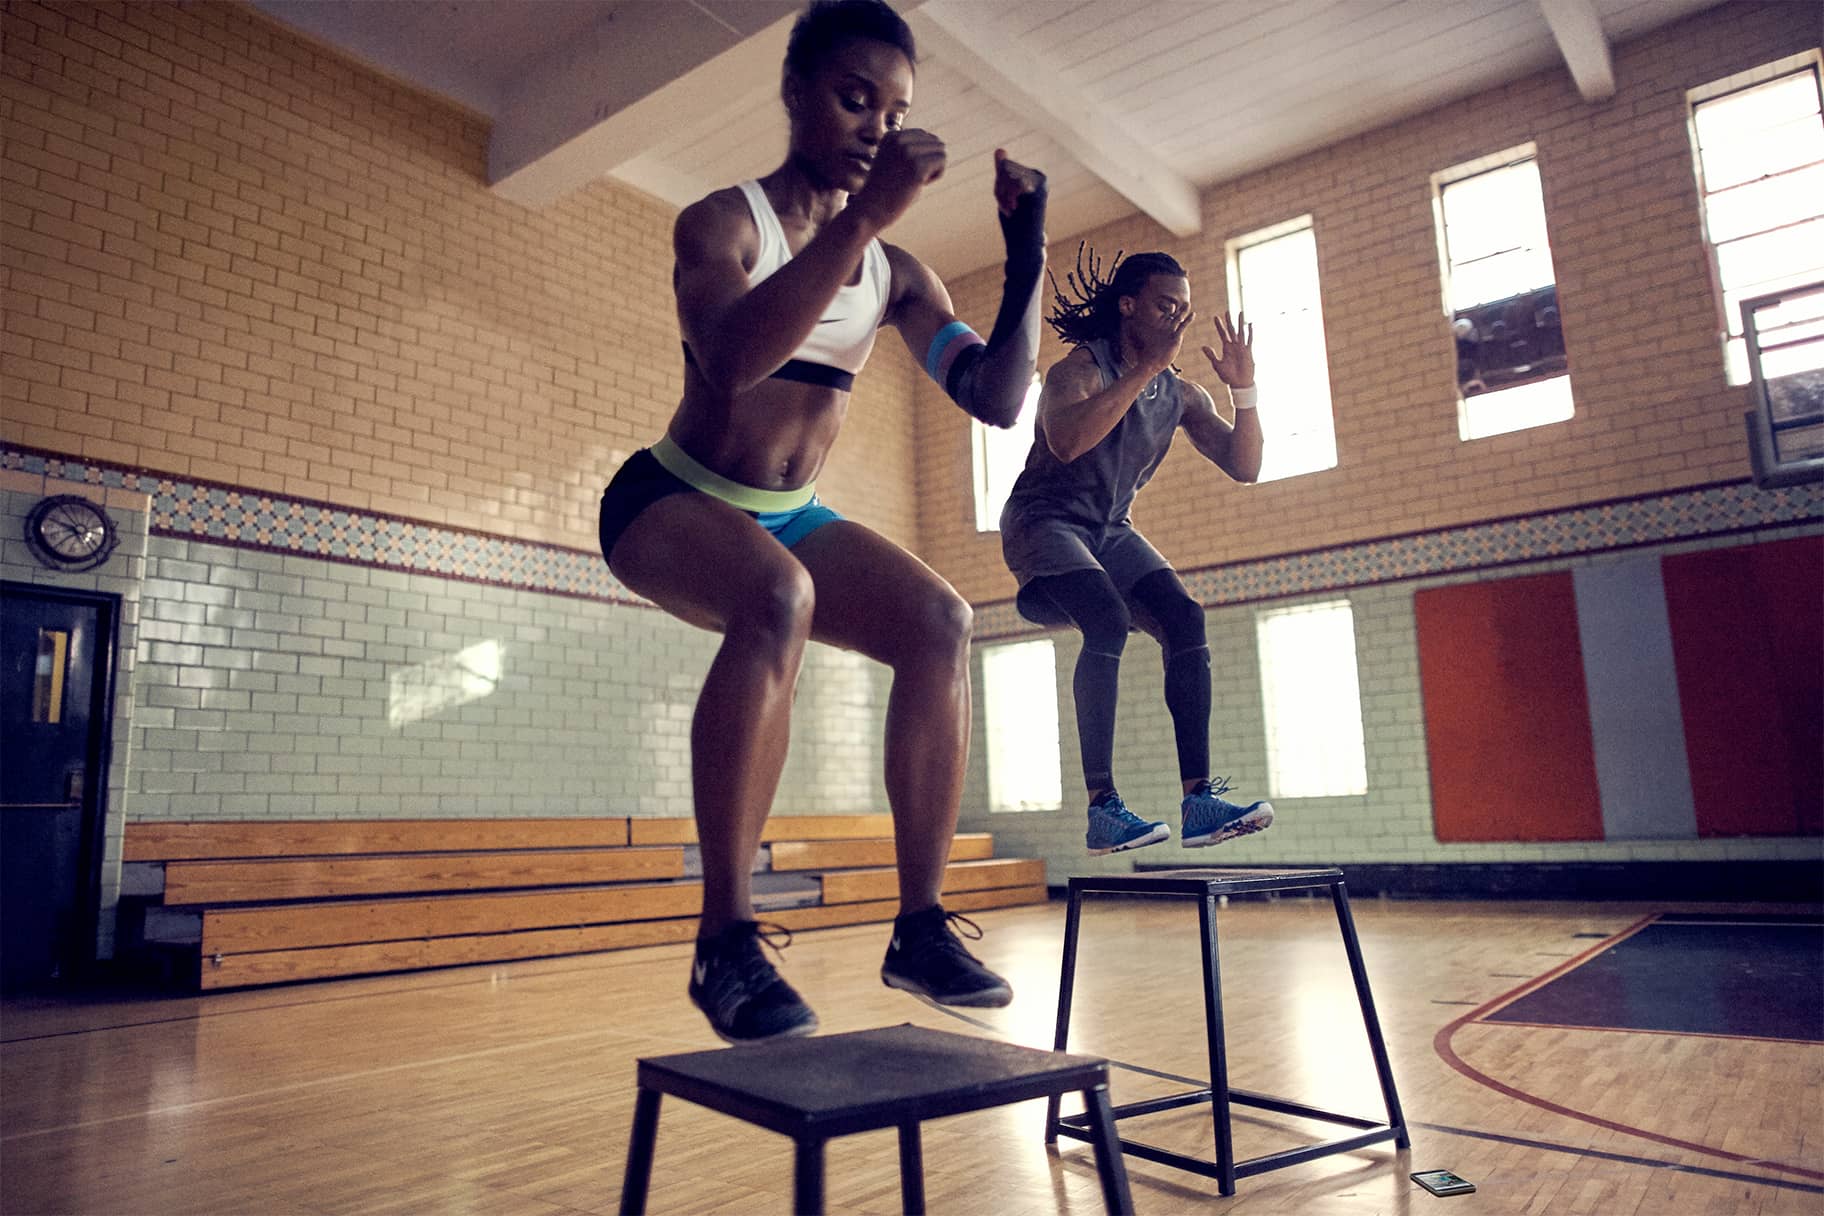 What Are the Major Differences Between Cardio and HIIT Workouts?